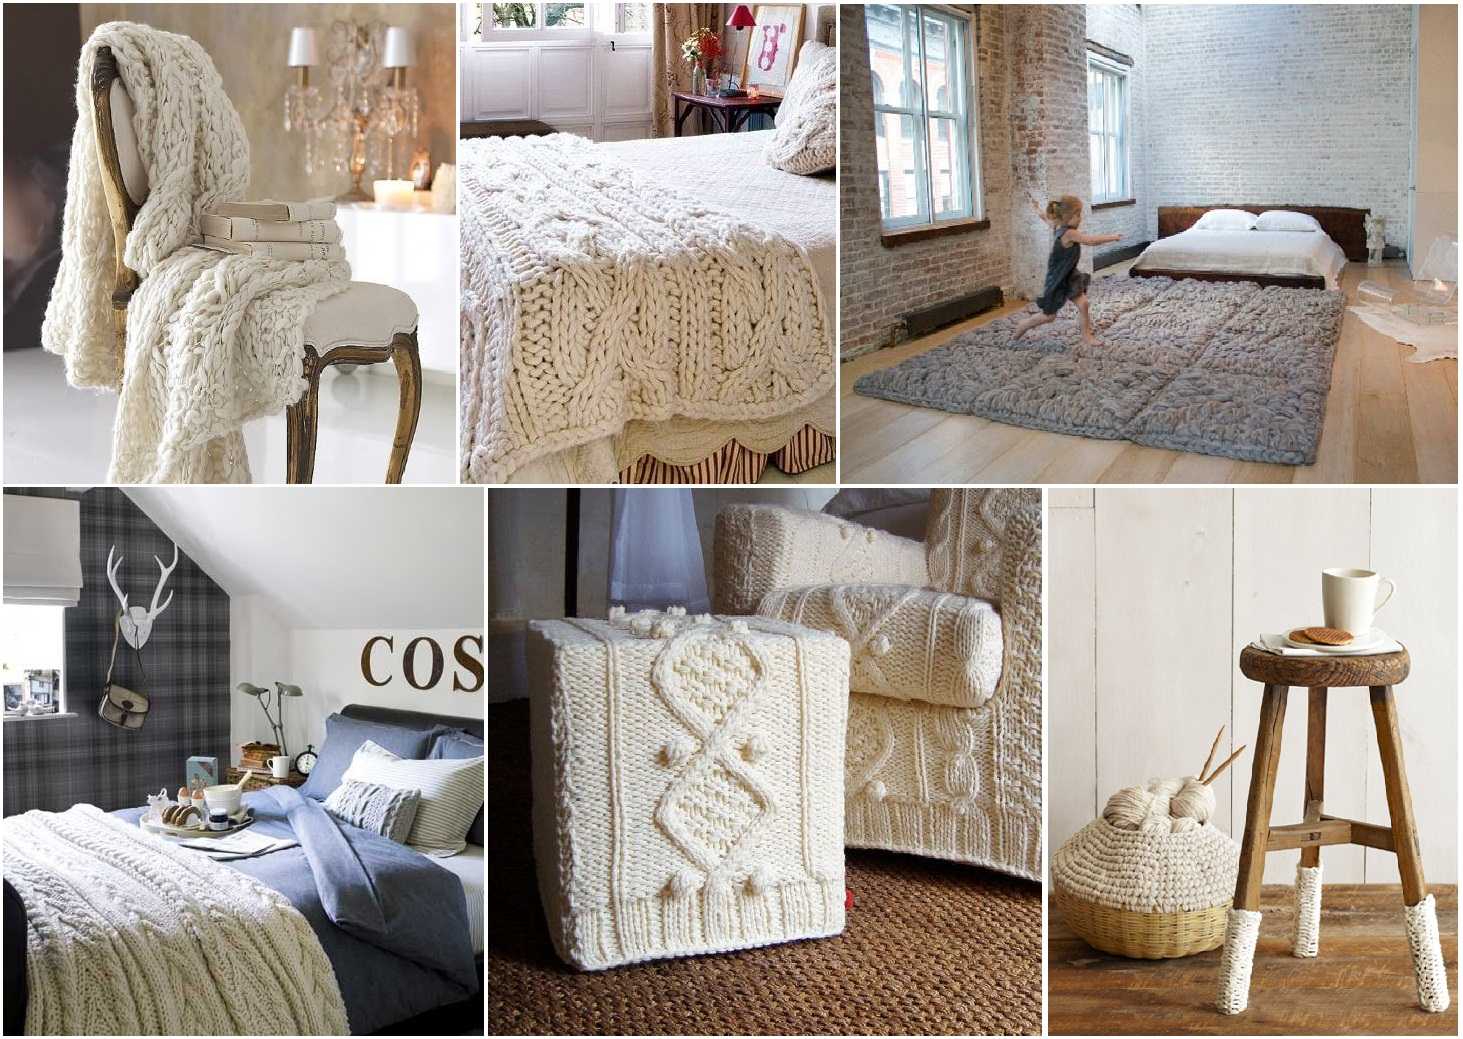 crocheted pillows in a living room interior